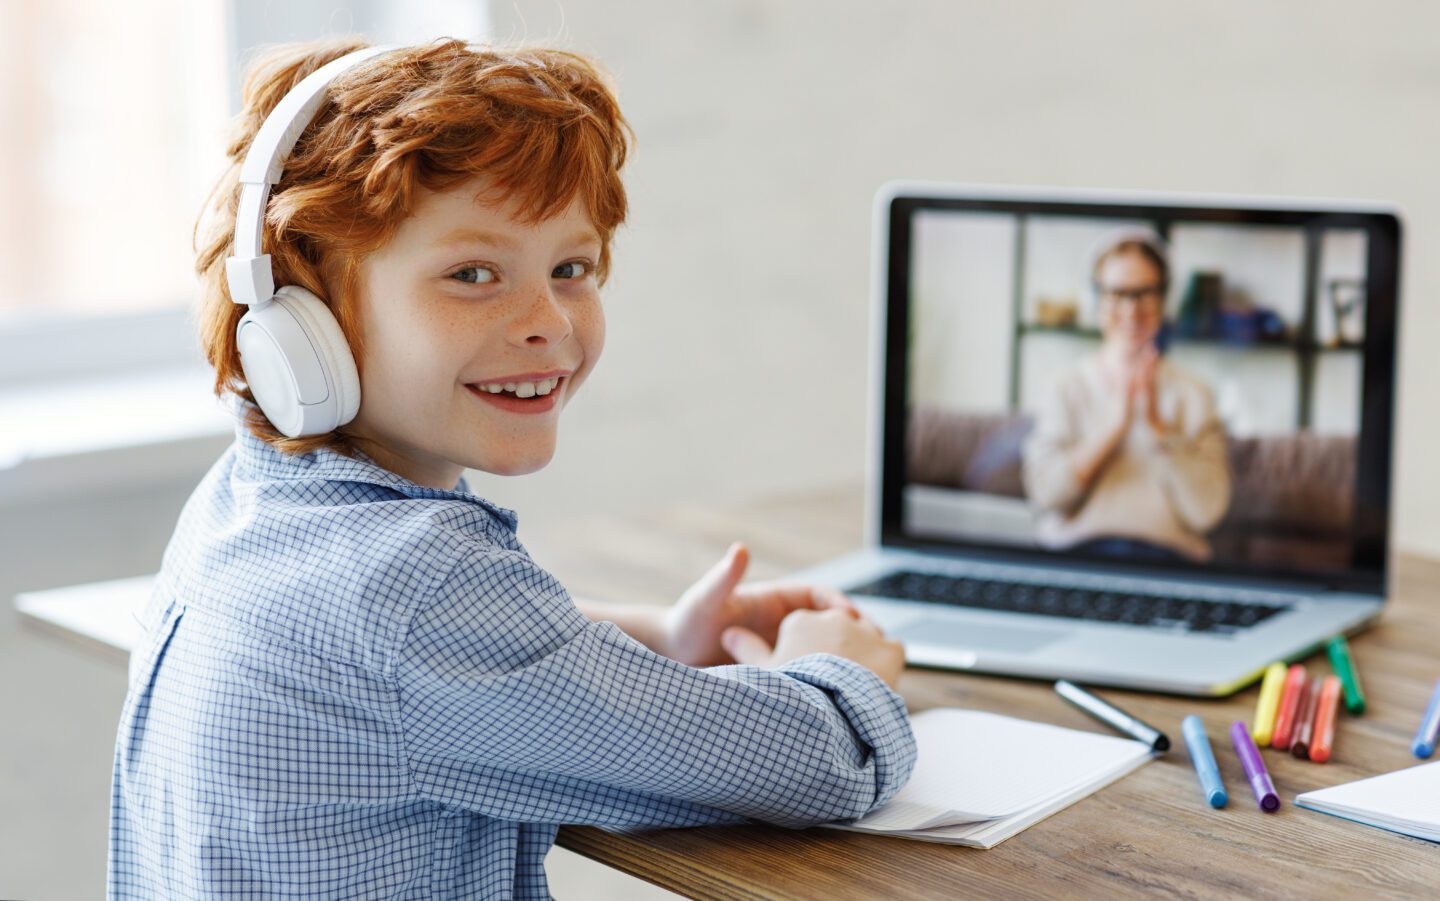 Cheerful boy during online lesson at home